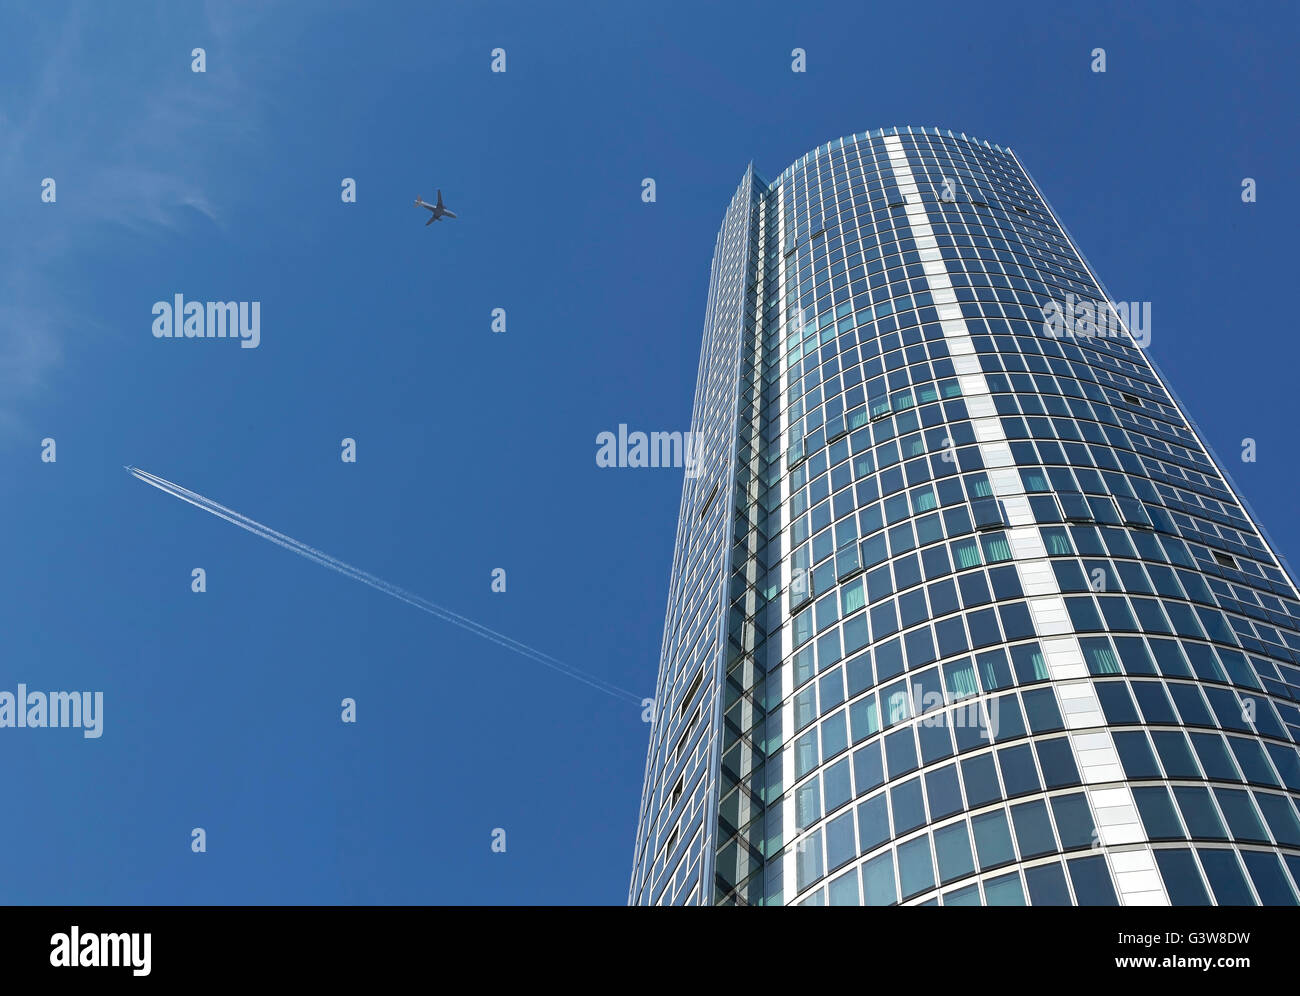 Facade from below with airplanes crossing. St George Wharf Tower, London, United Kingdom. Architect: Broadway Malyan Limited, 2014. Stock Photo